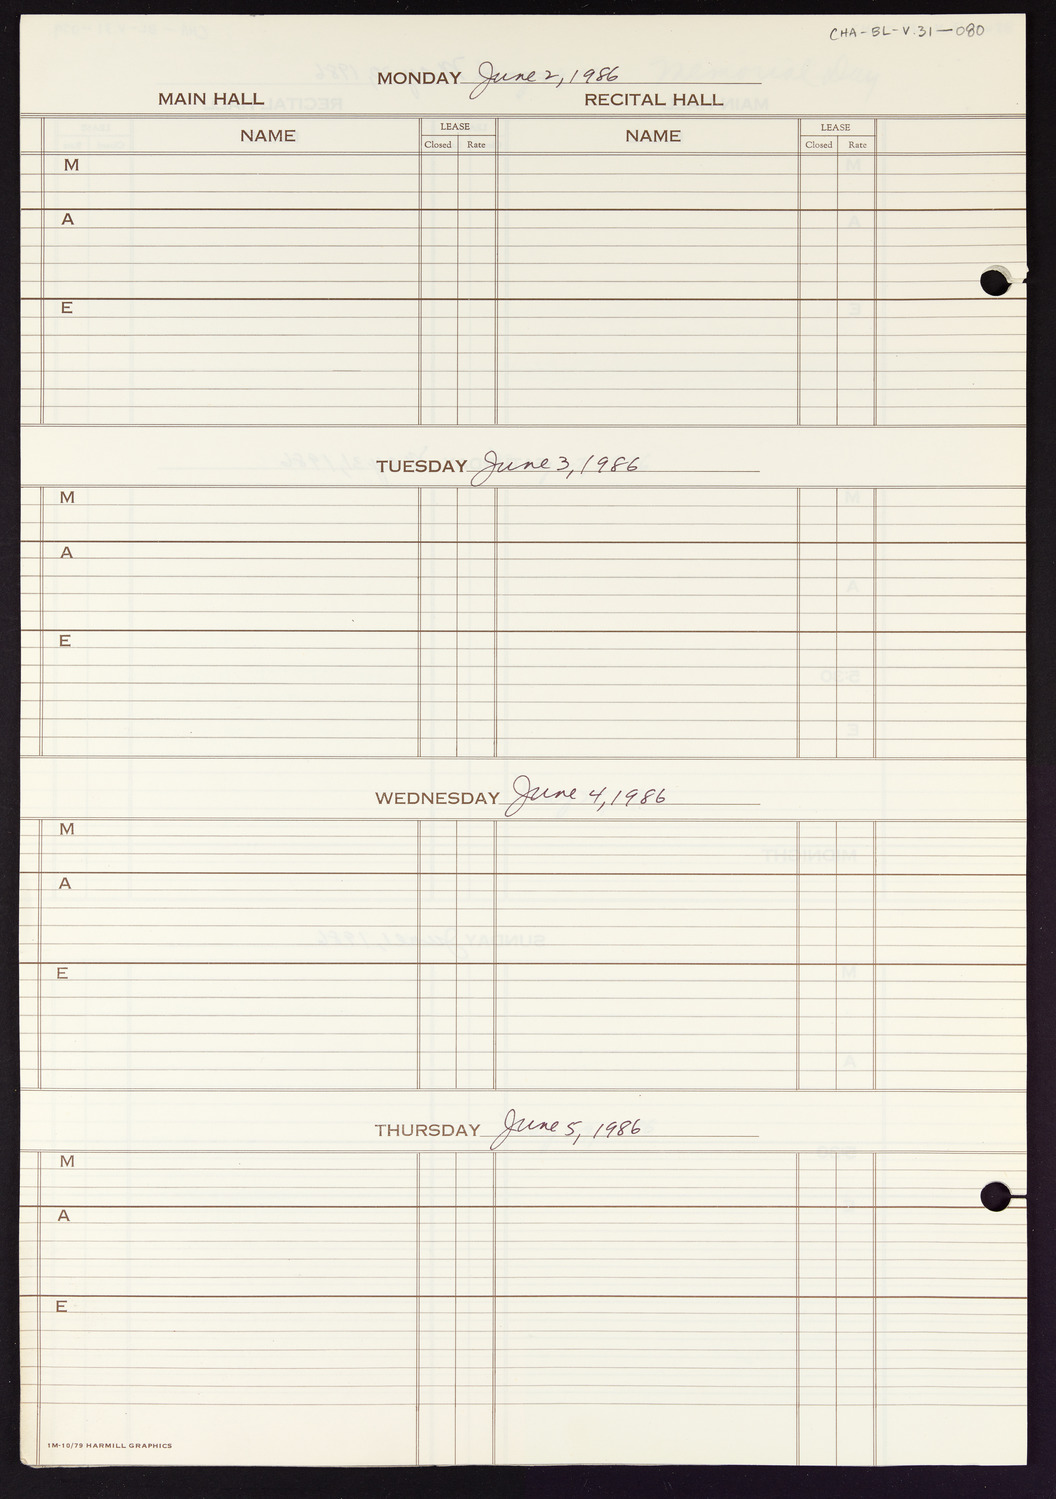 Carnegie Hall Booking Ledger, volume 31, page 80